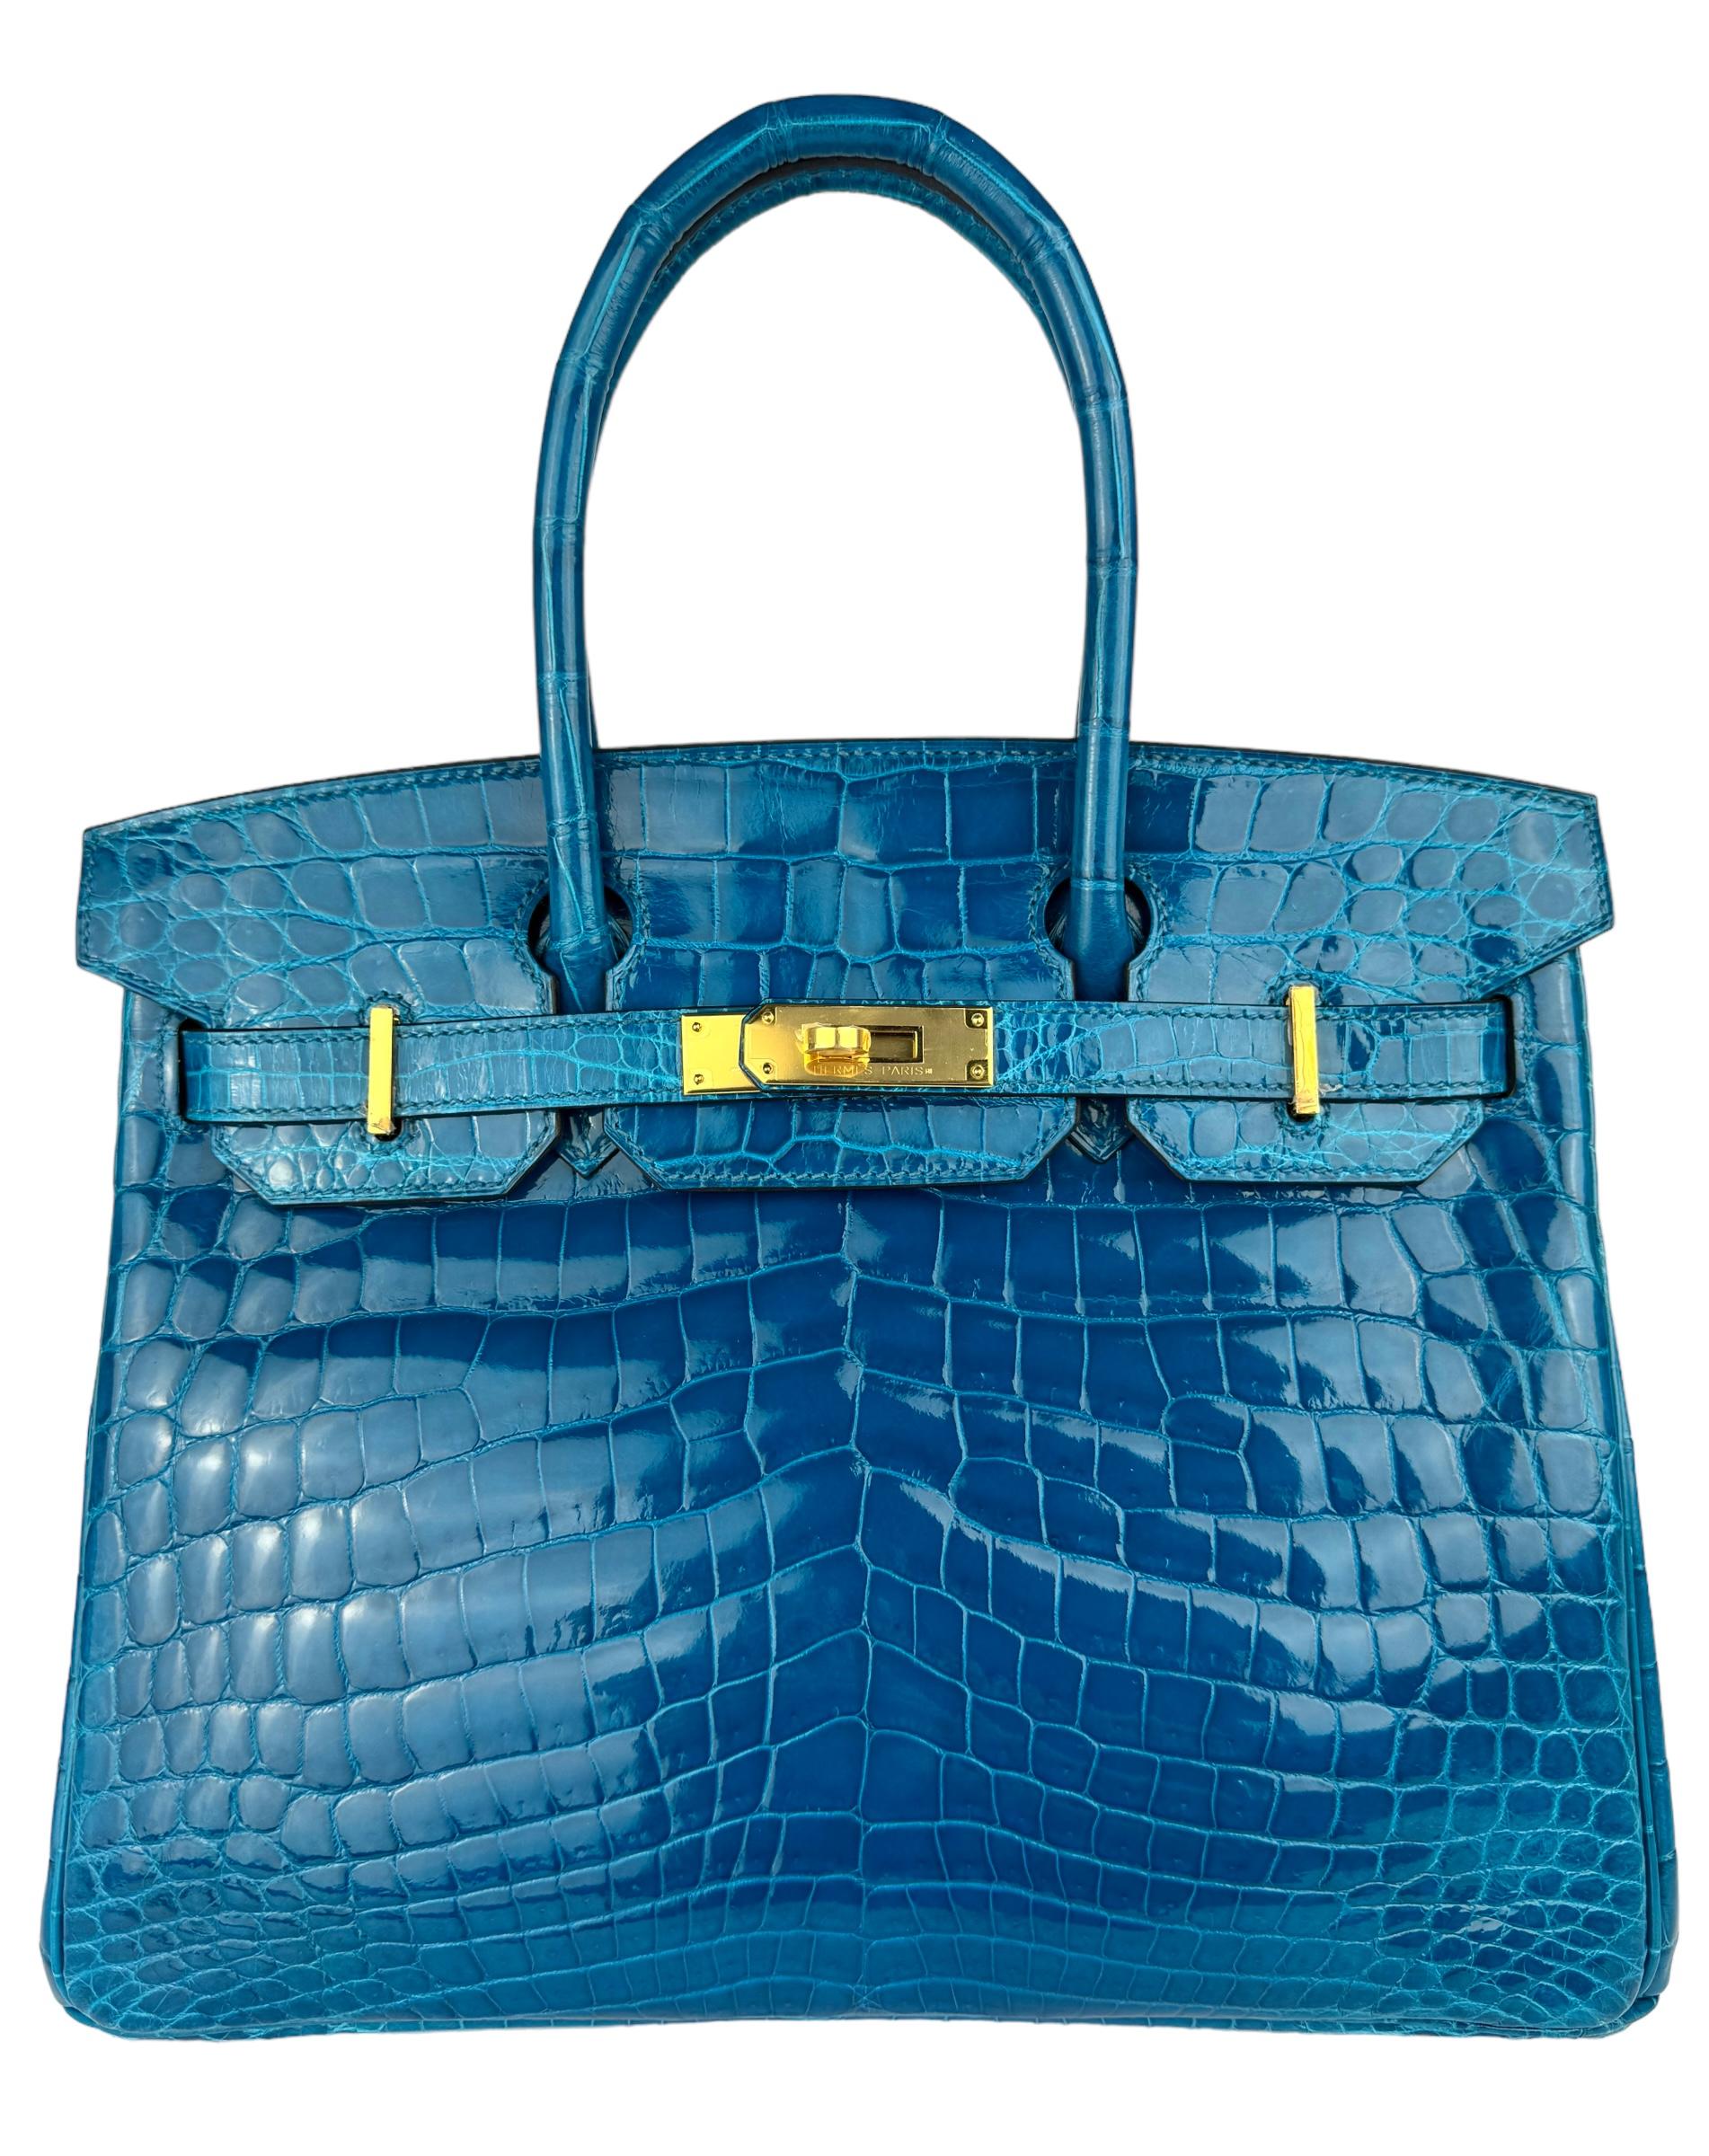 Absolutely Stunning RARE Collectors Piece. Hermes Birkin 30 Blue Izmir Niloticus Crocodile Leather. Complimented by Gold Hardware. Pristine Condition, Plastic on hardware, excellent structure and corners. 2015 T Stamp. BEST PRICE ON THE MARKET!